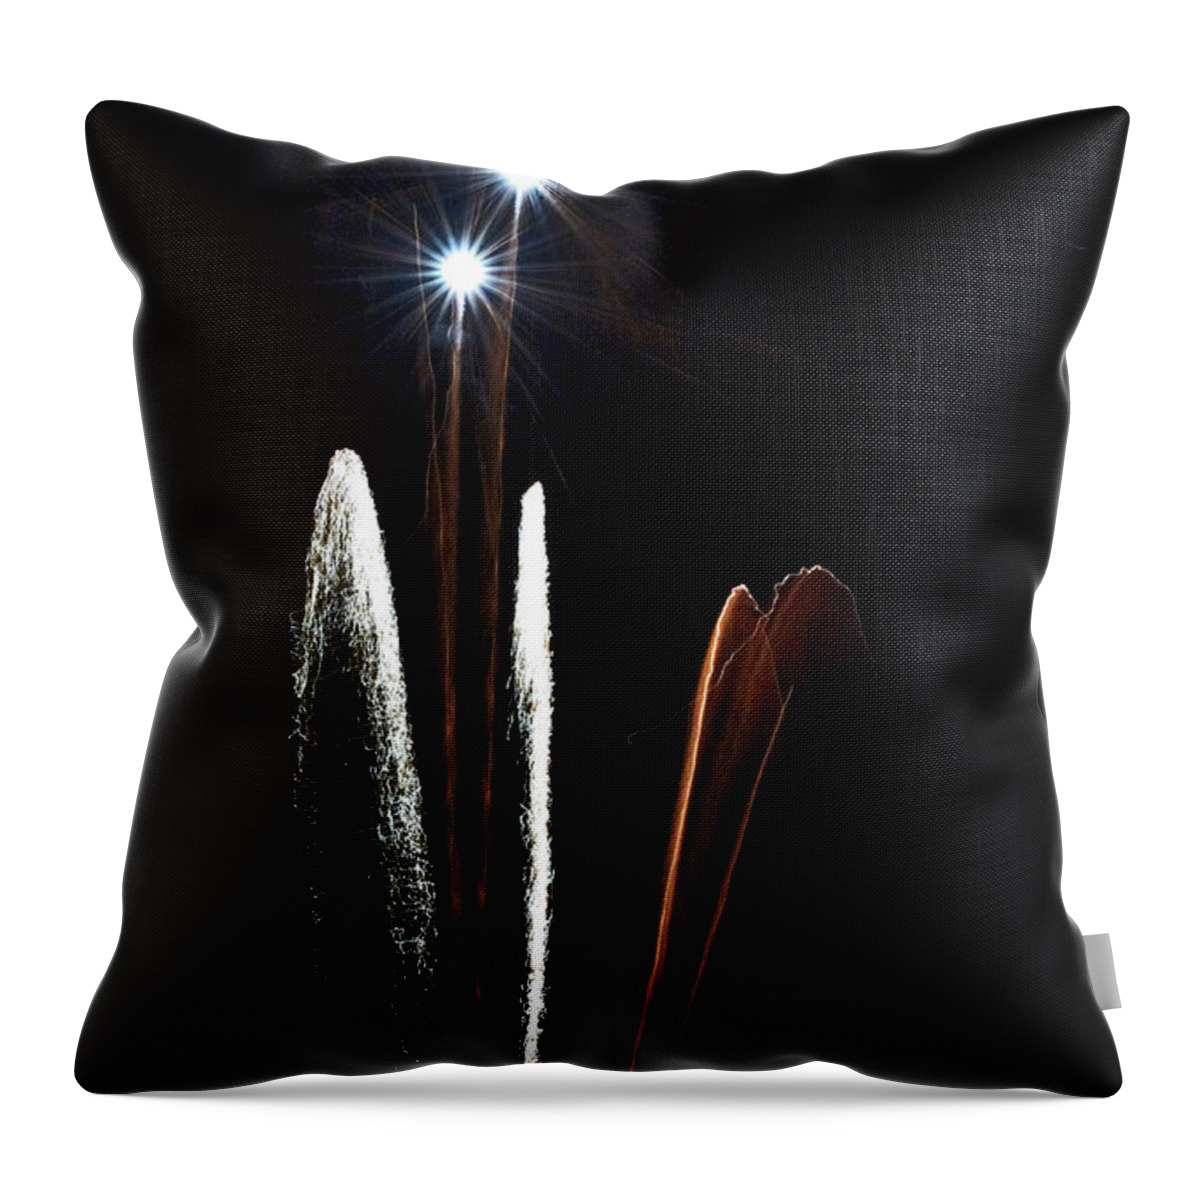 Fireworks Throw Pillow featuring the photograph Air Fire One by Agusti Pardo Rossello